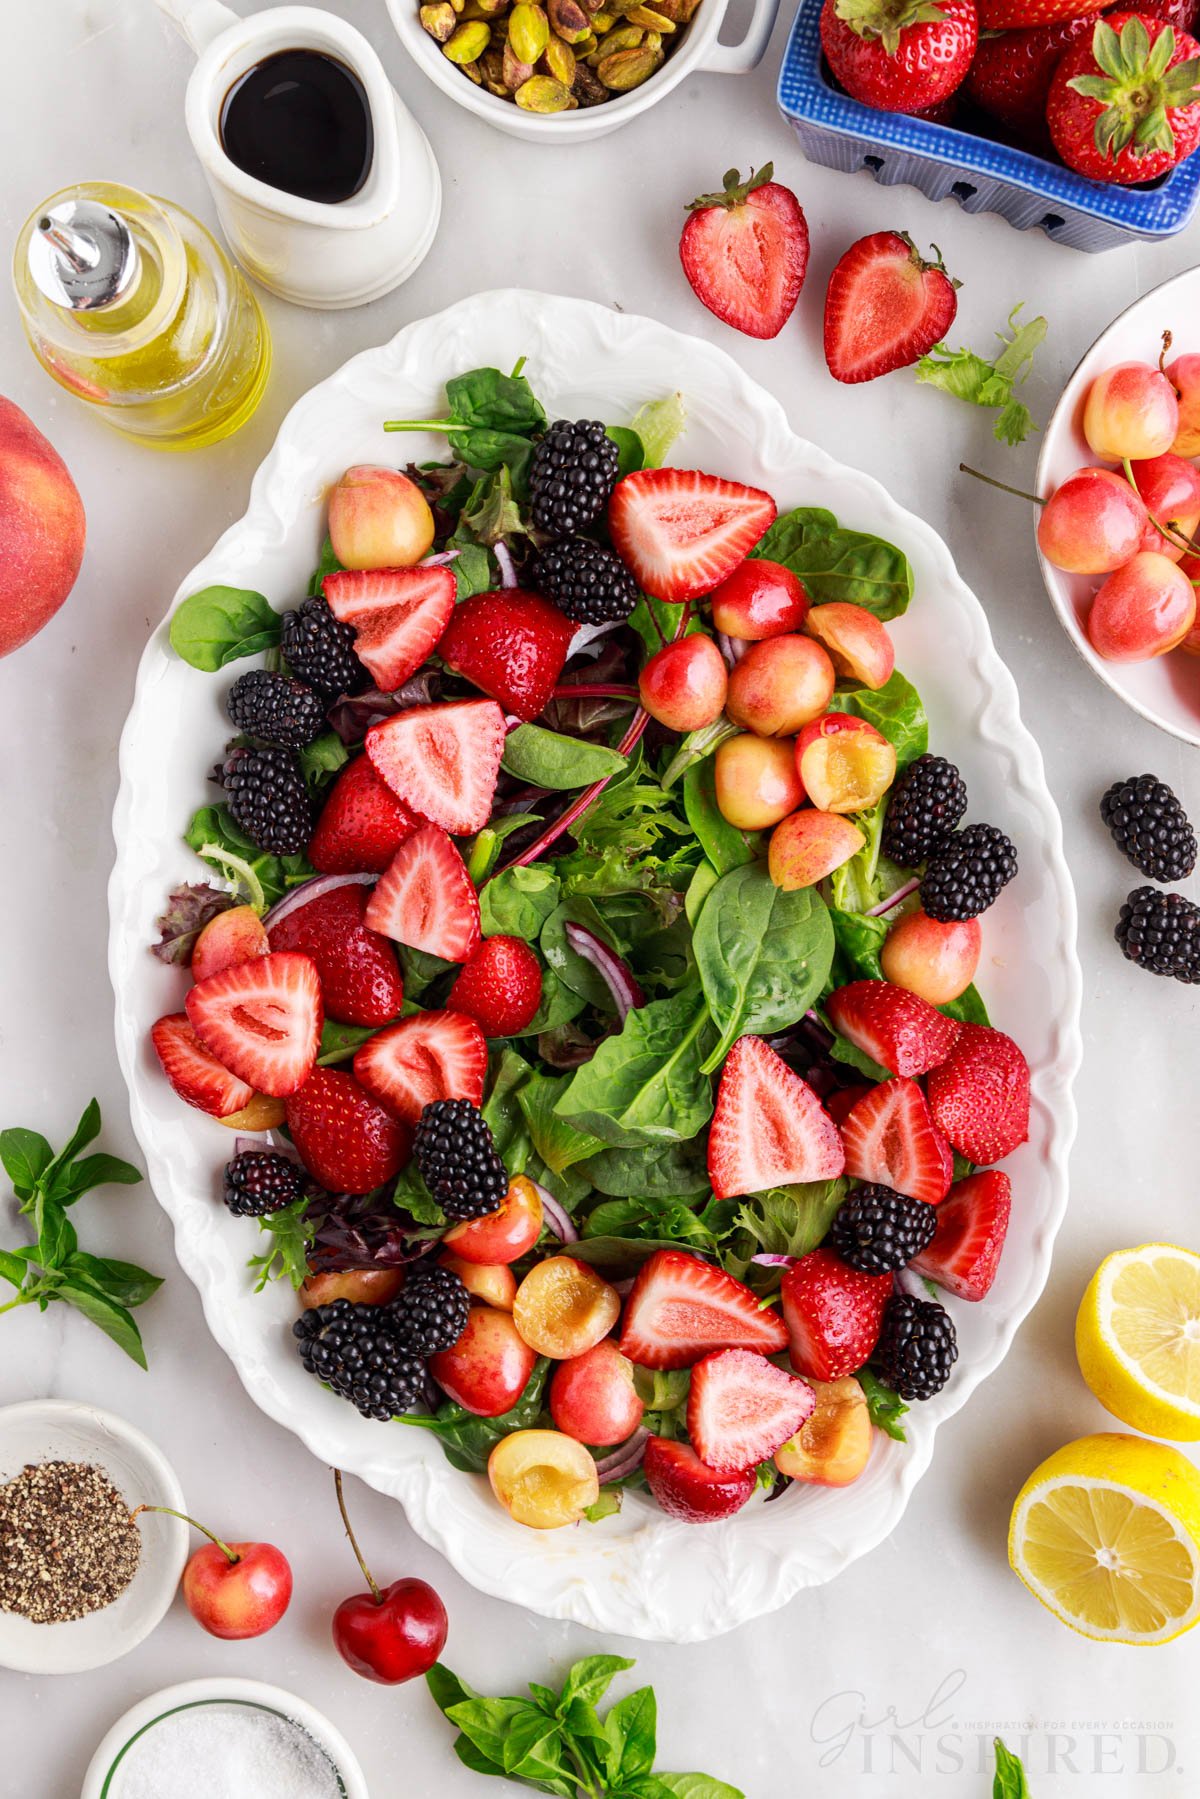 Berries arranged in groups of same color on the bed of greens to build Peach Burrata Salad.